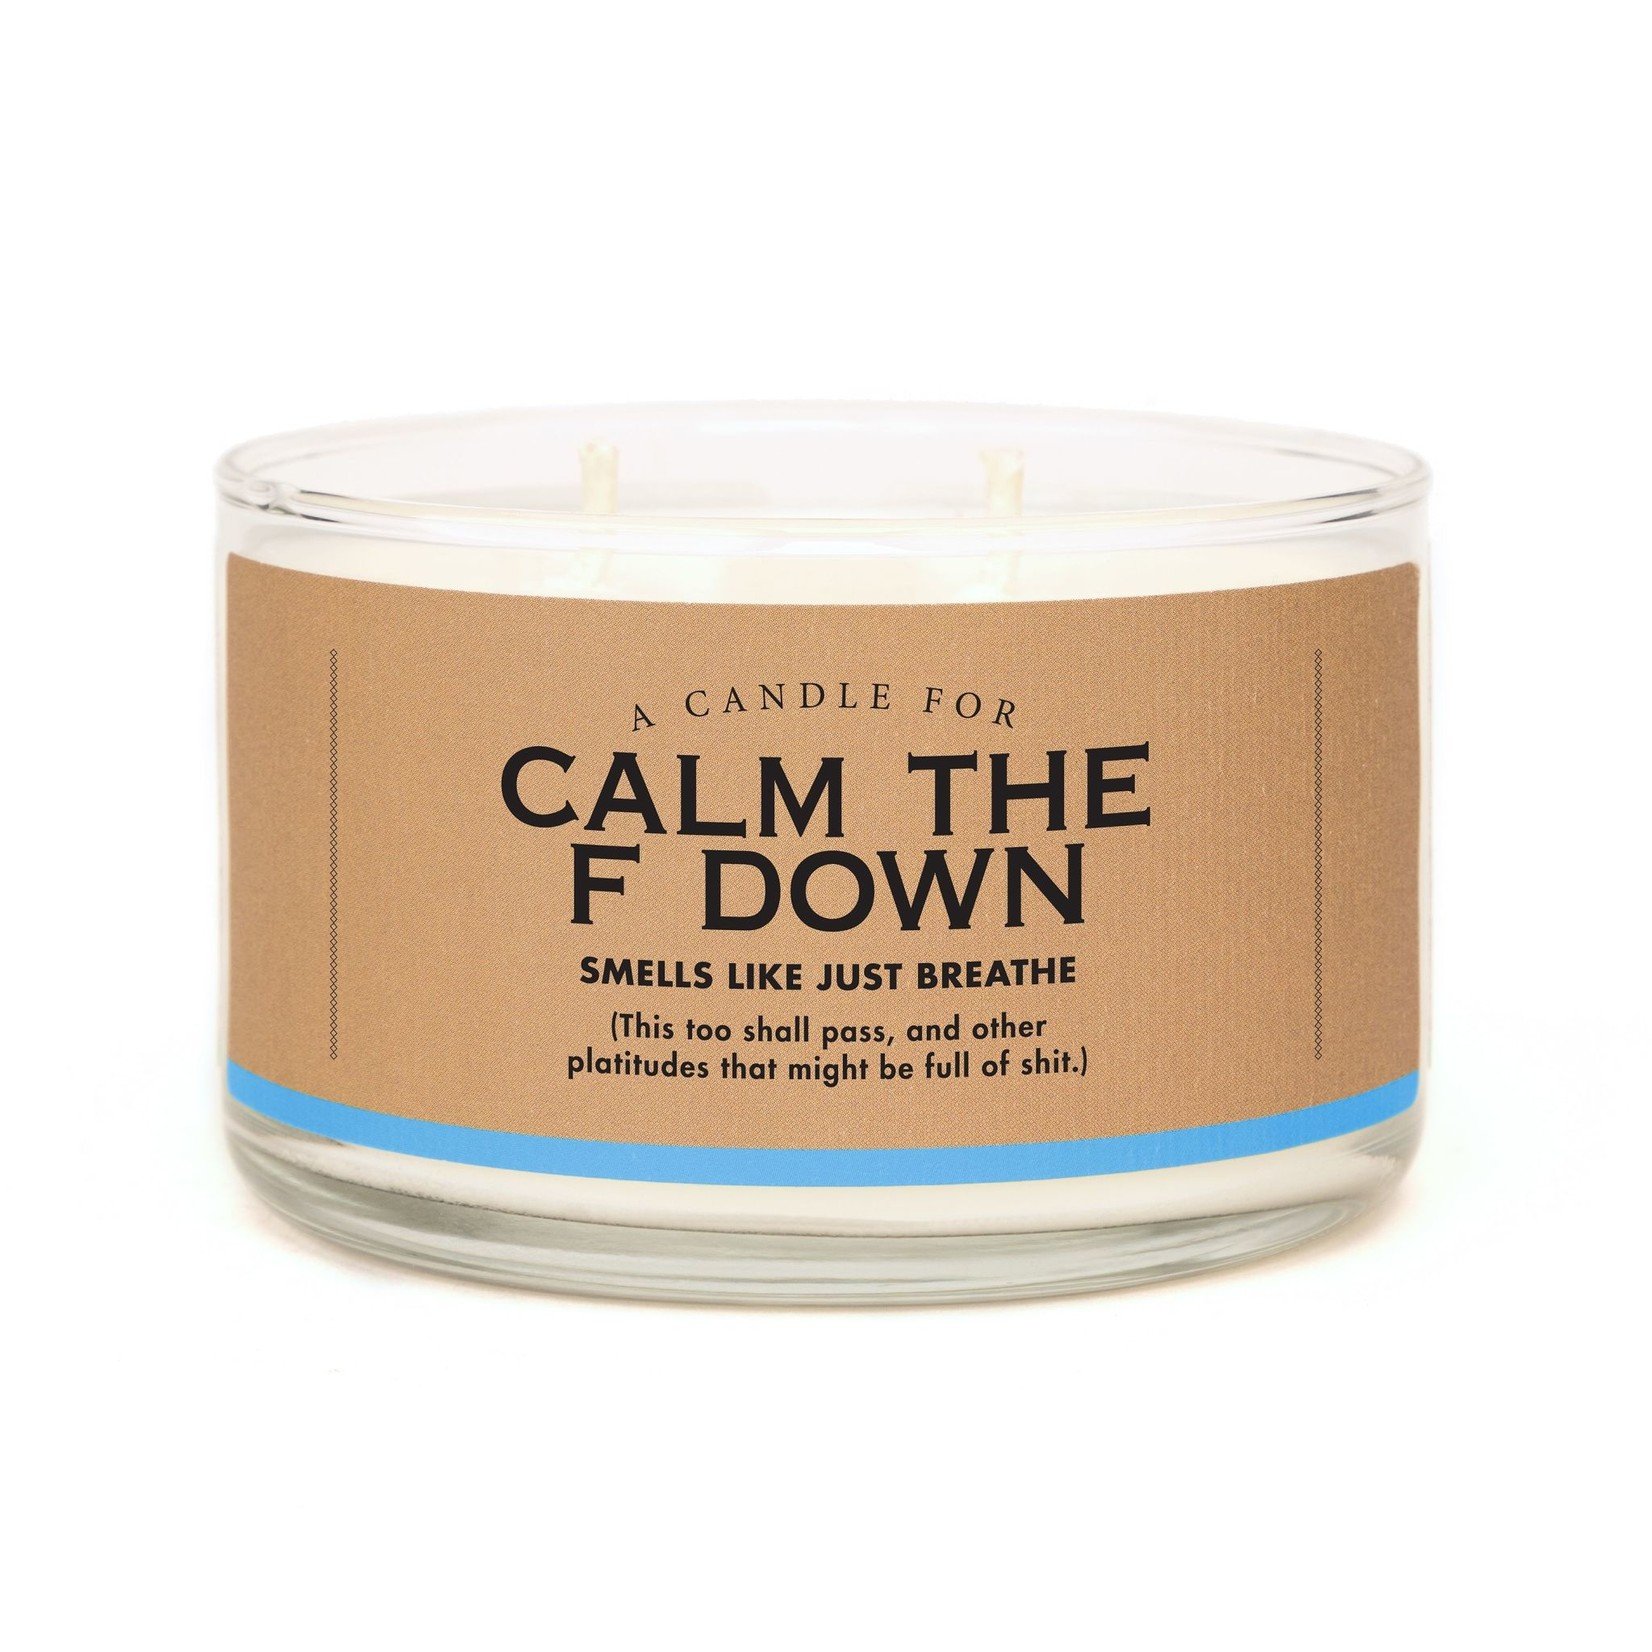 Whisky River Soap Calm the F Down - Candle